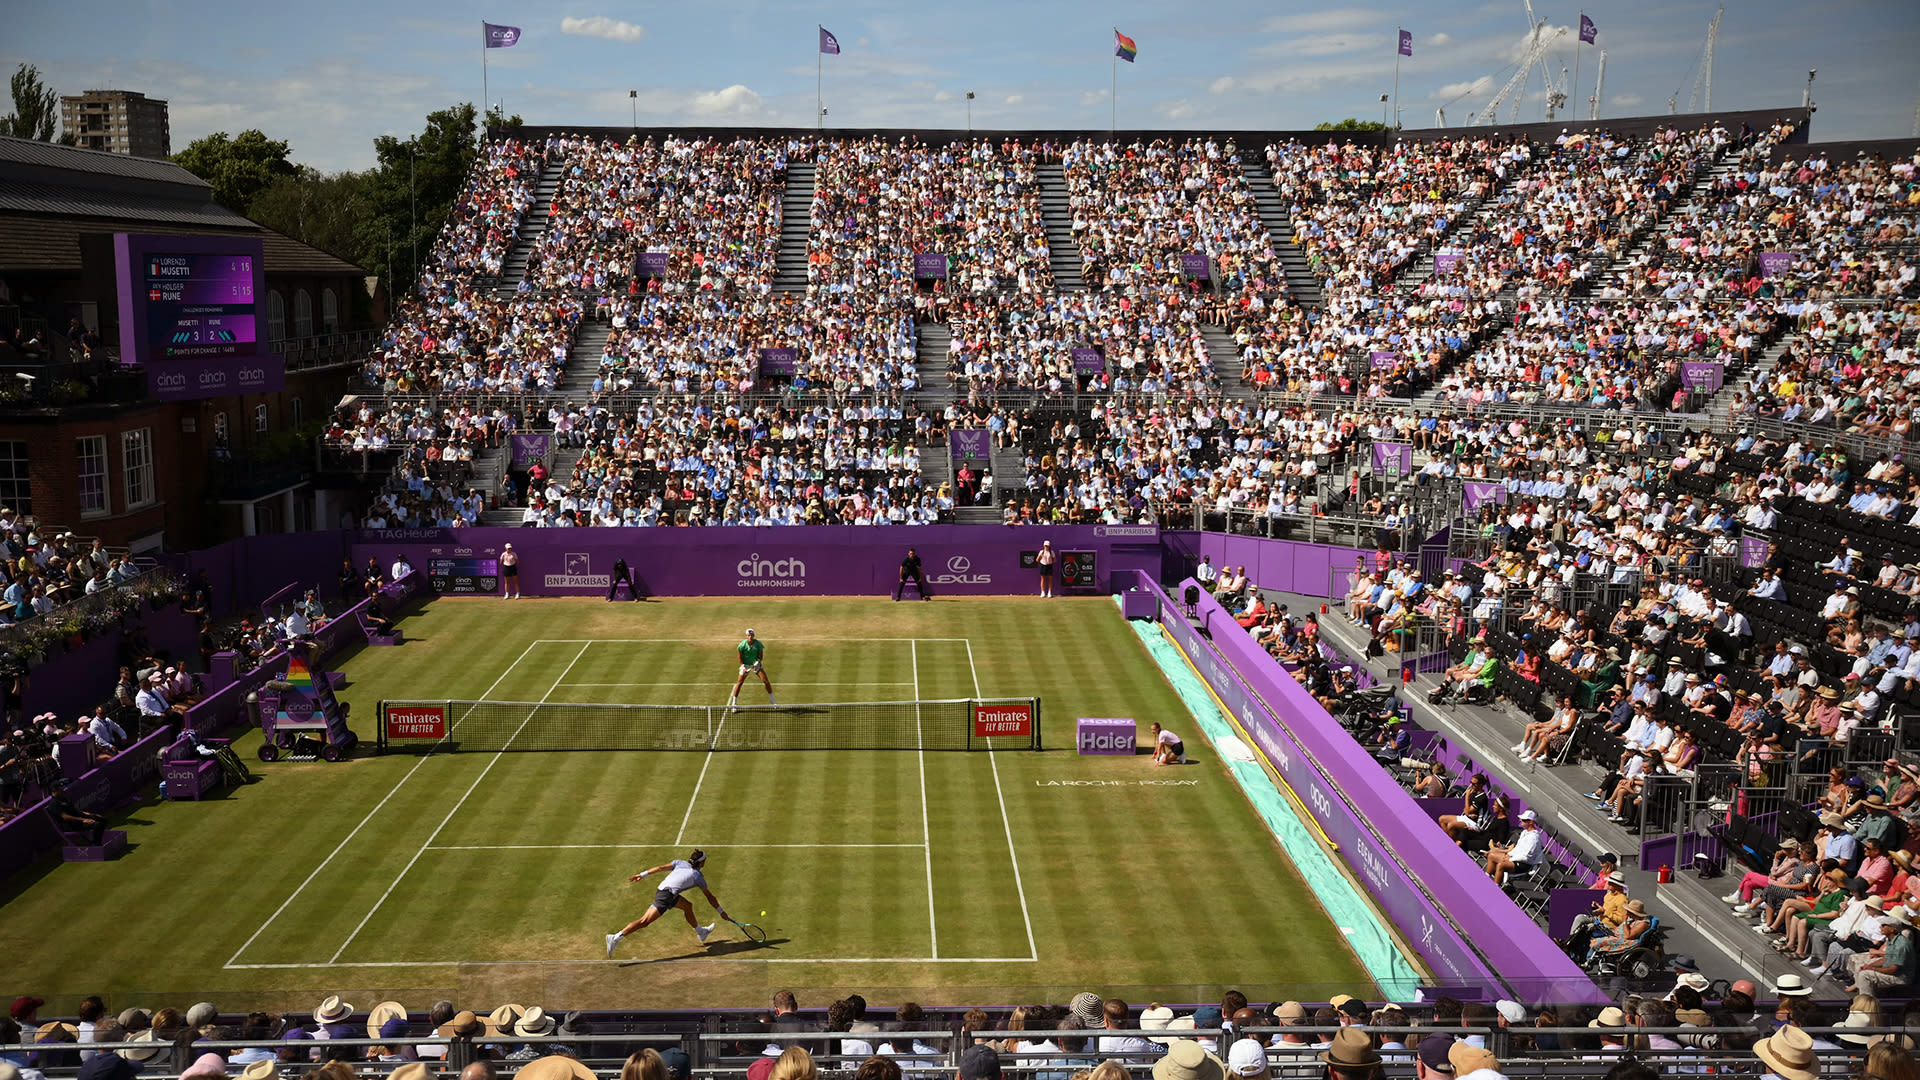 Queen's Club to host first WTA event in more than 50 years during run-up to 2025 Wimbledon | Tennis.com